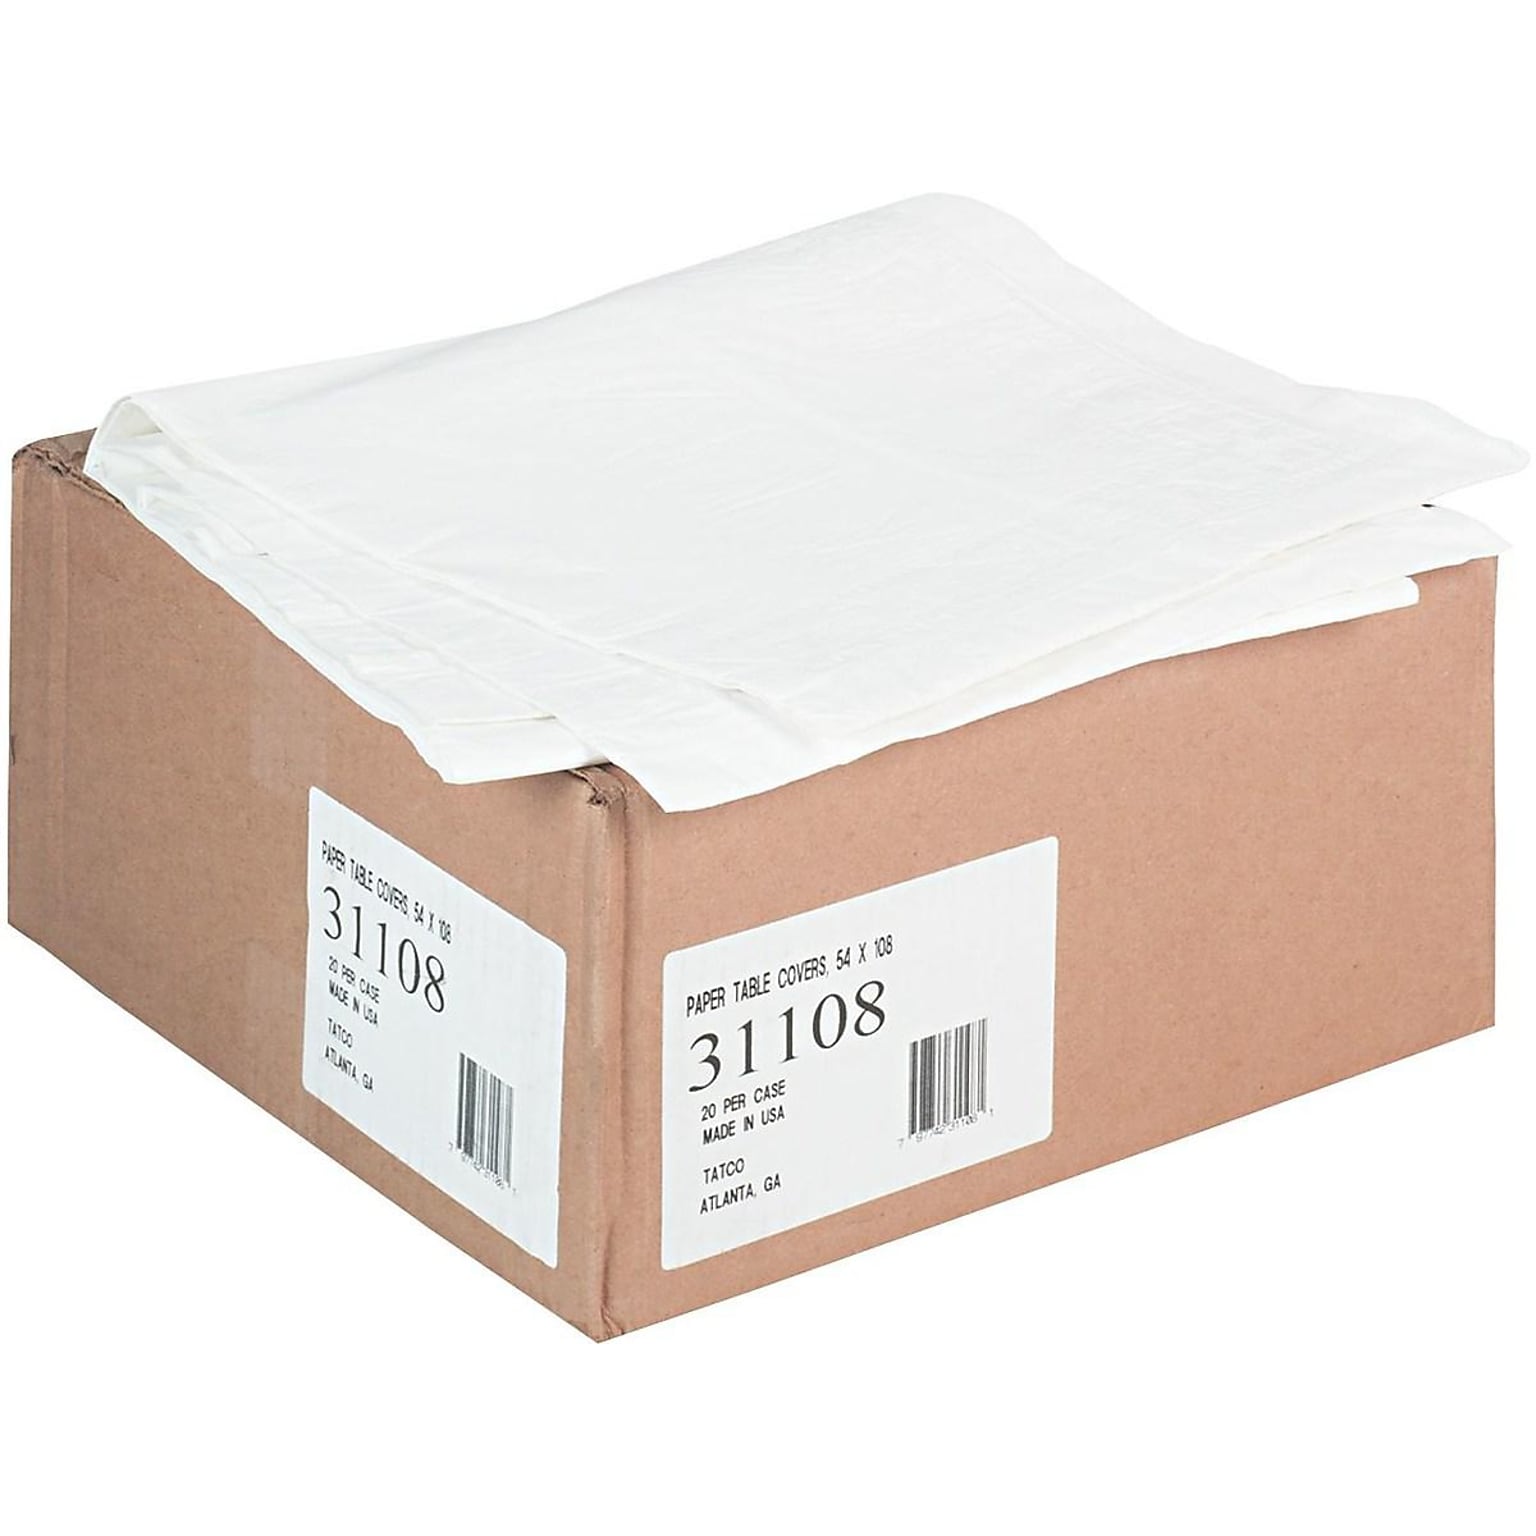 Hoffmaster 108W Solid Tablecovers, White, 25/Carton (210130)